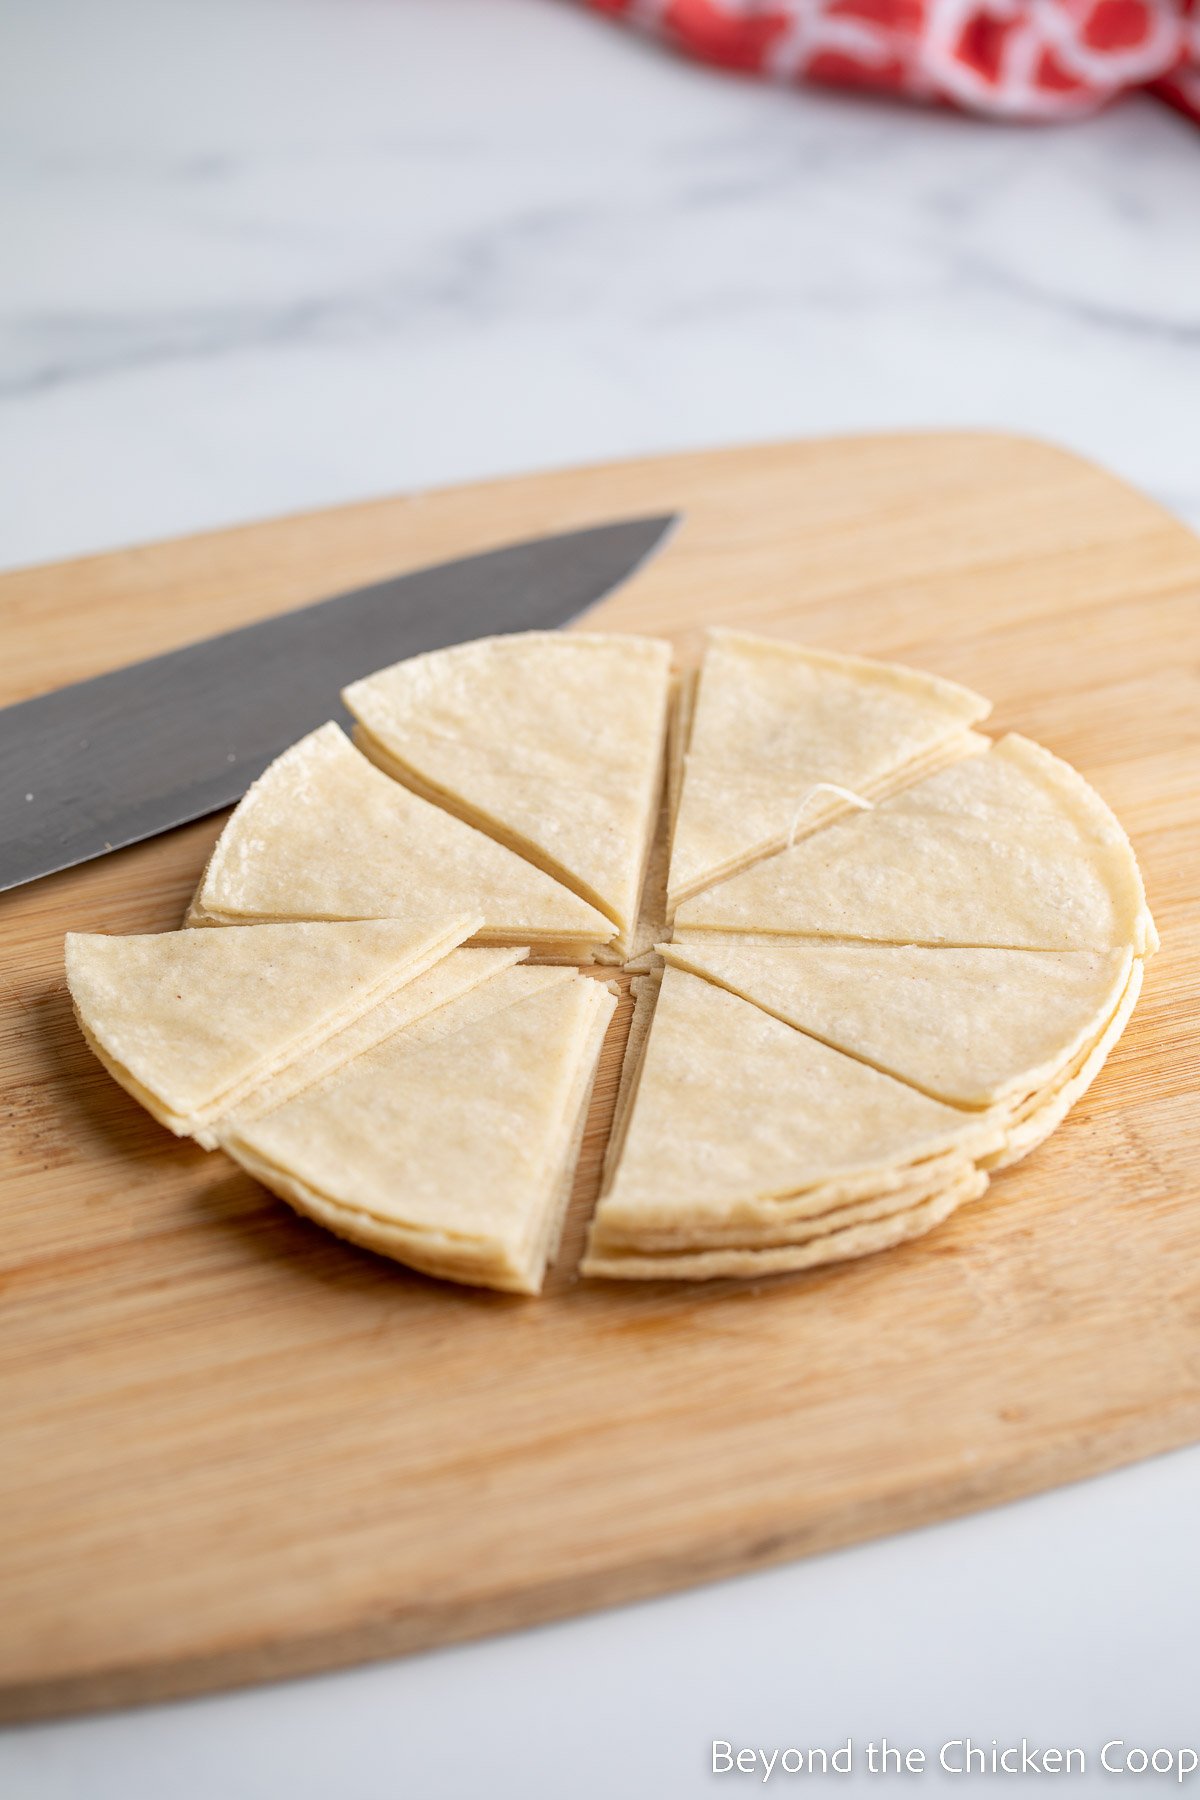 Cutting Tortillas into wedges.